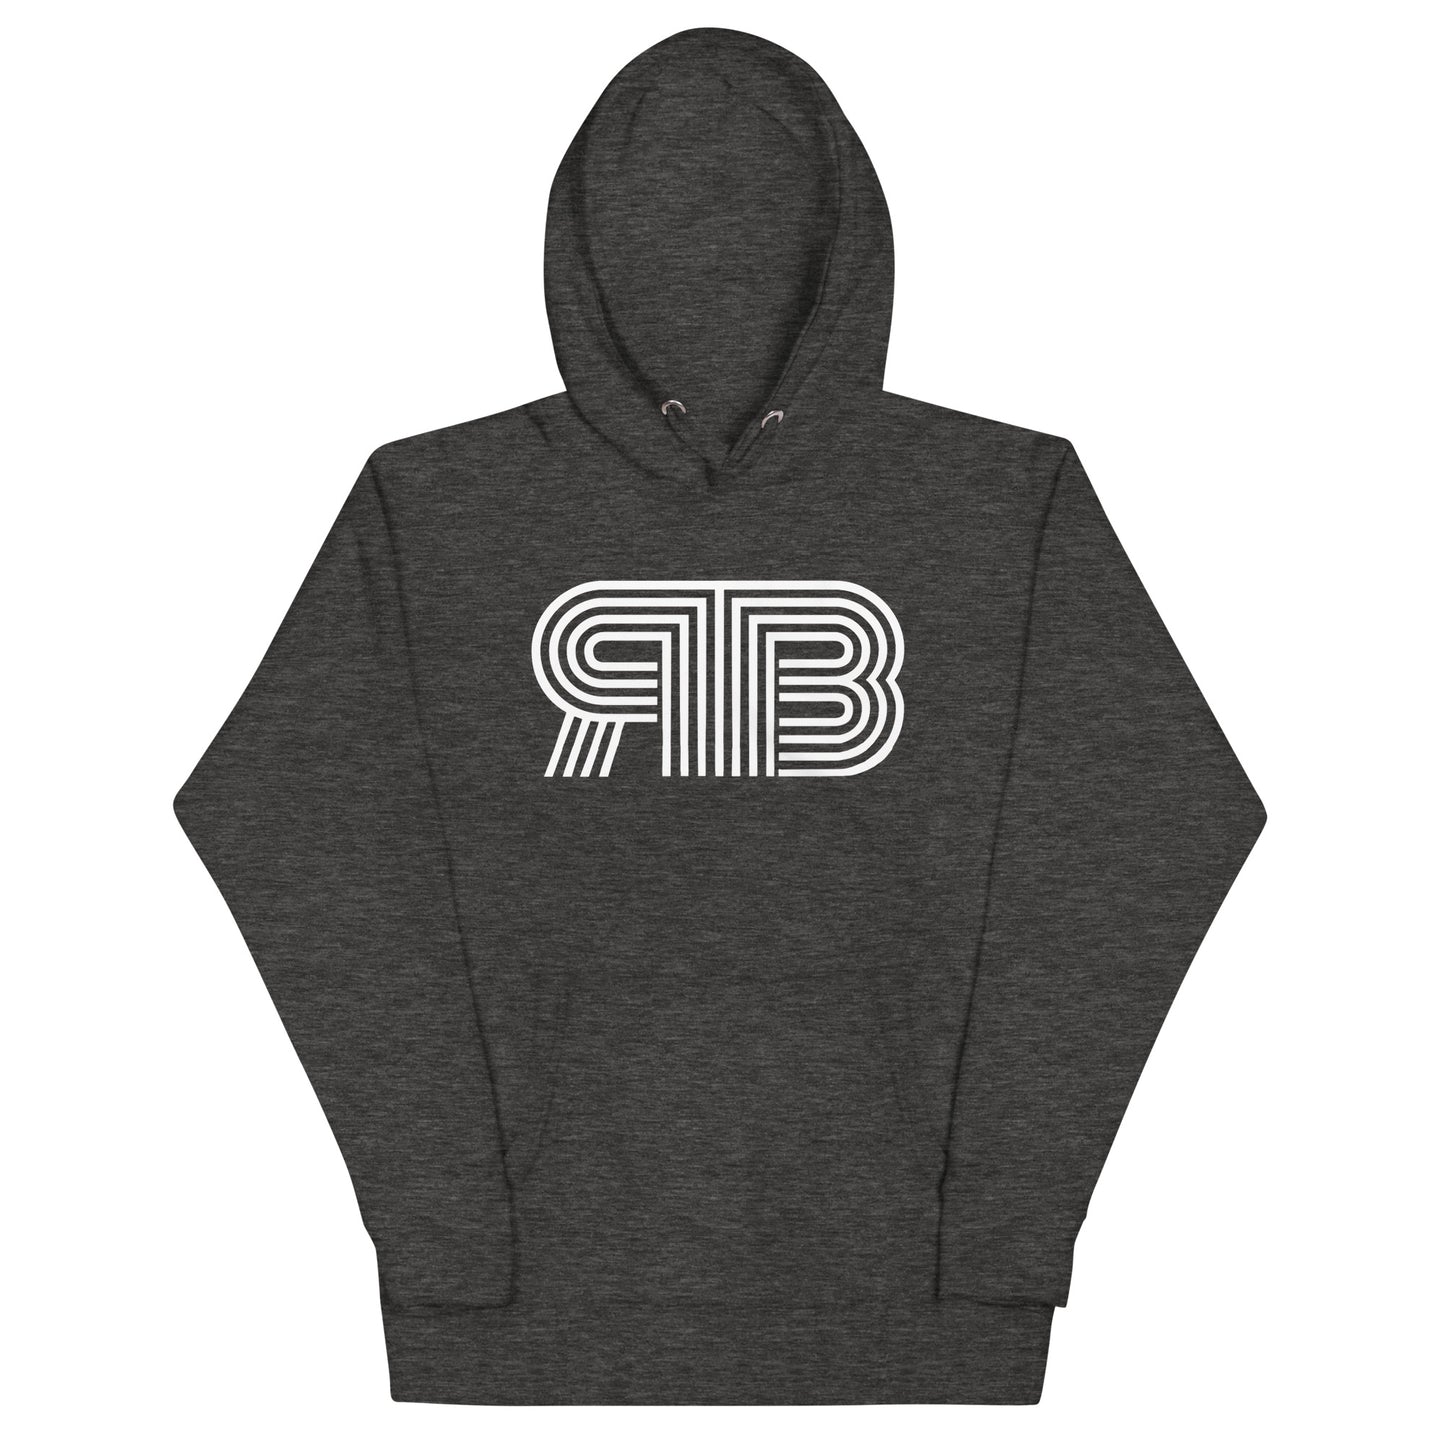 Classic RB Hoodie - Charcoal Heather